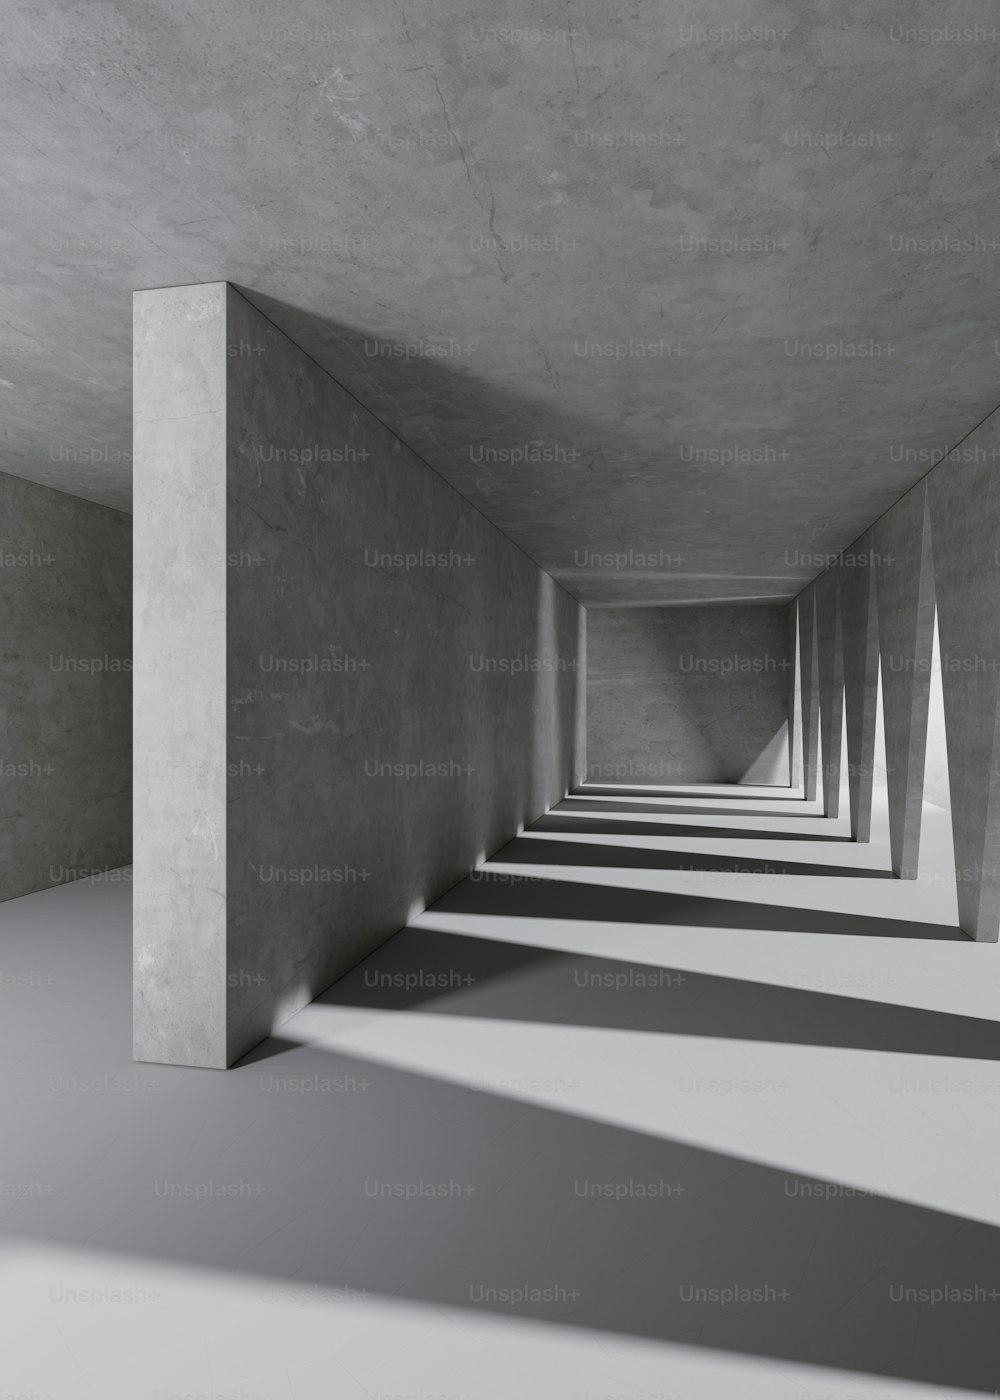 a long row of concrete pillars in a room